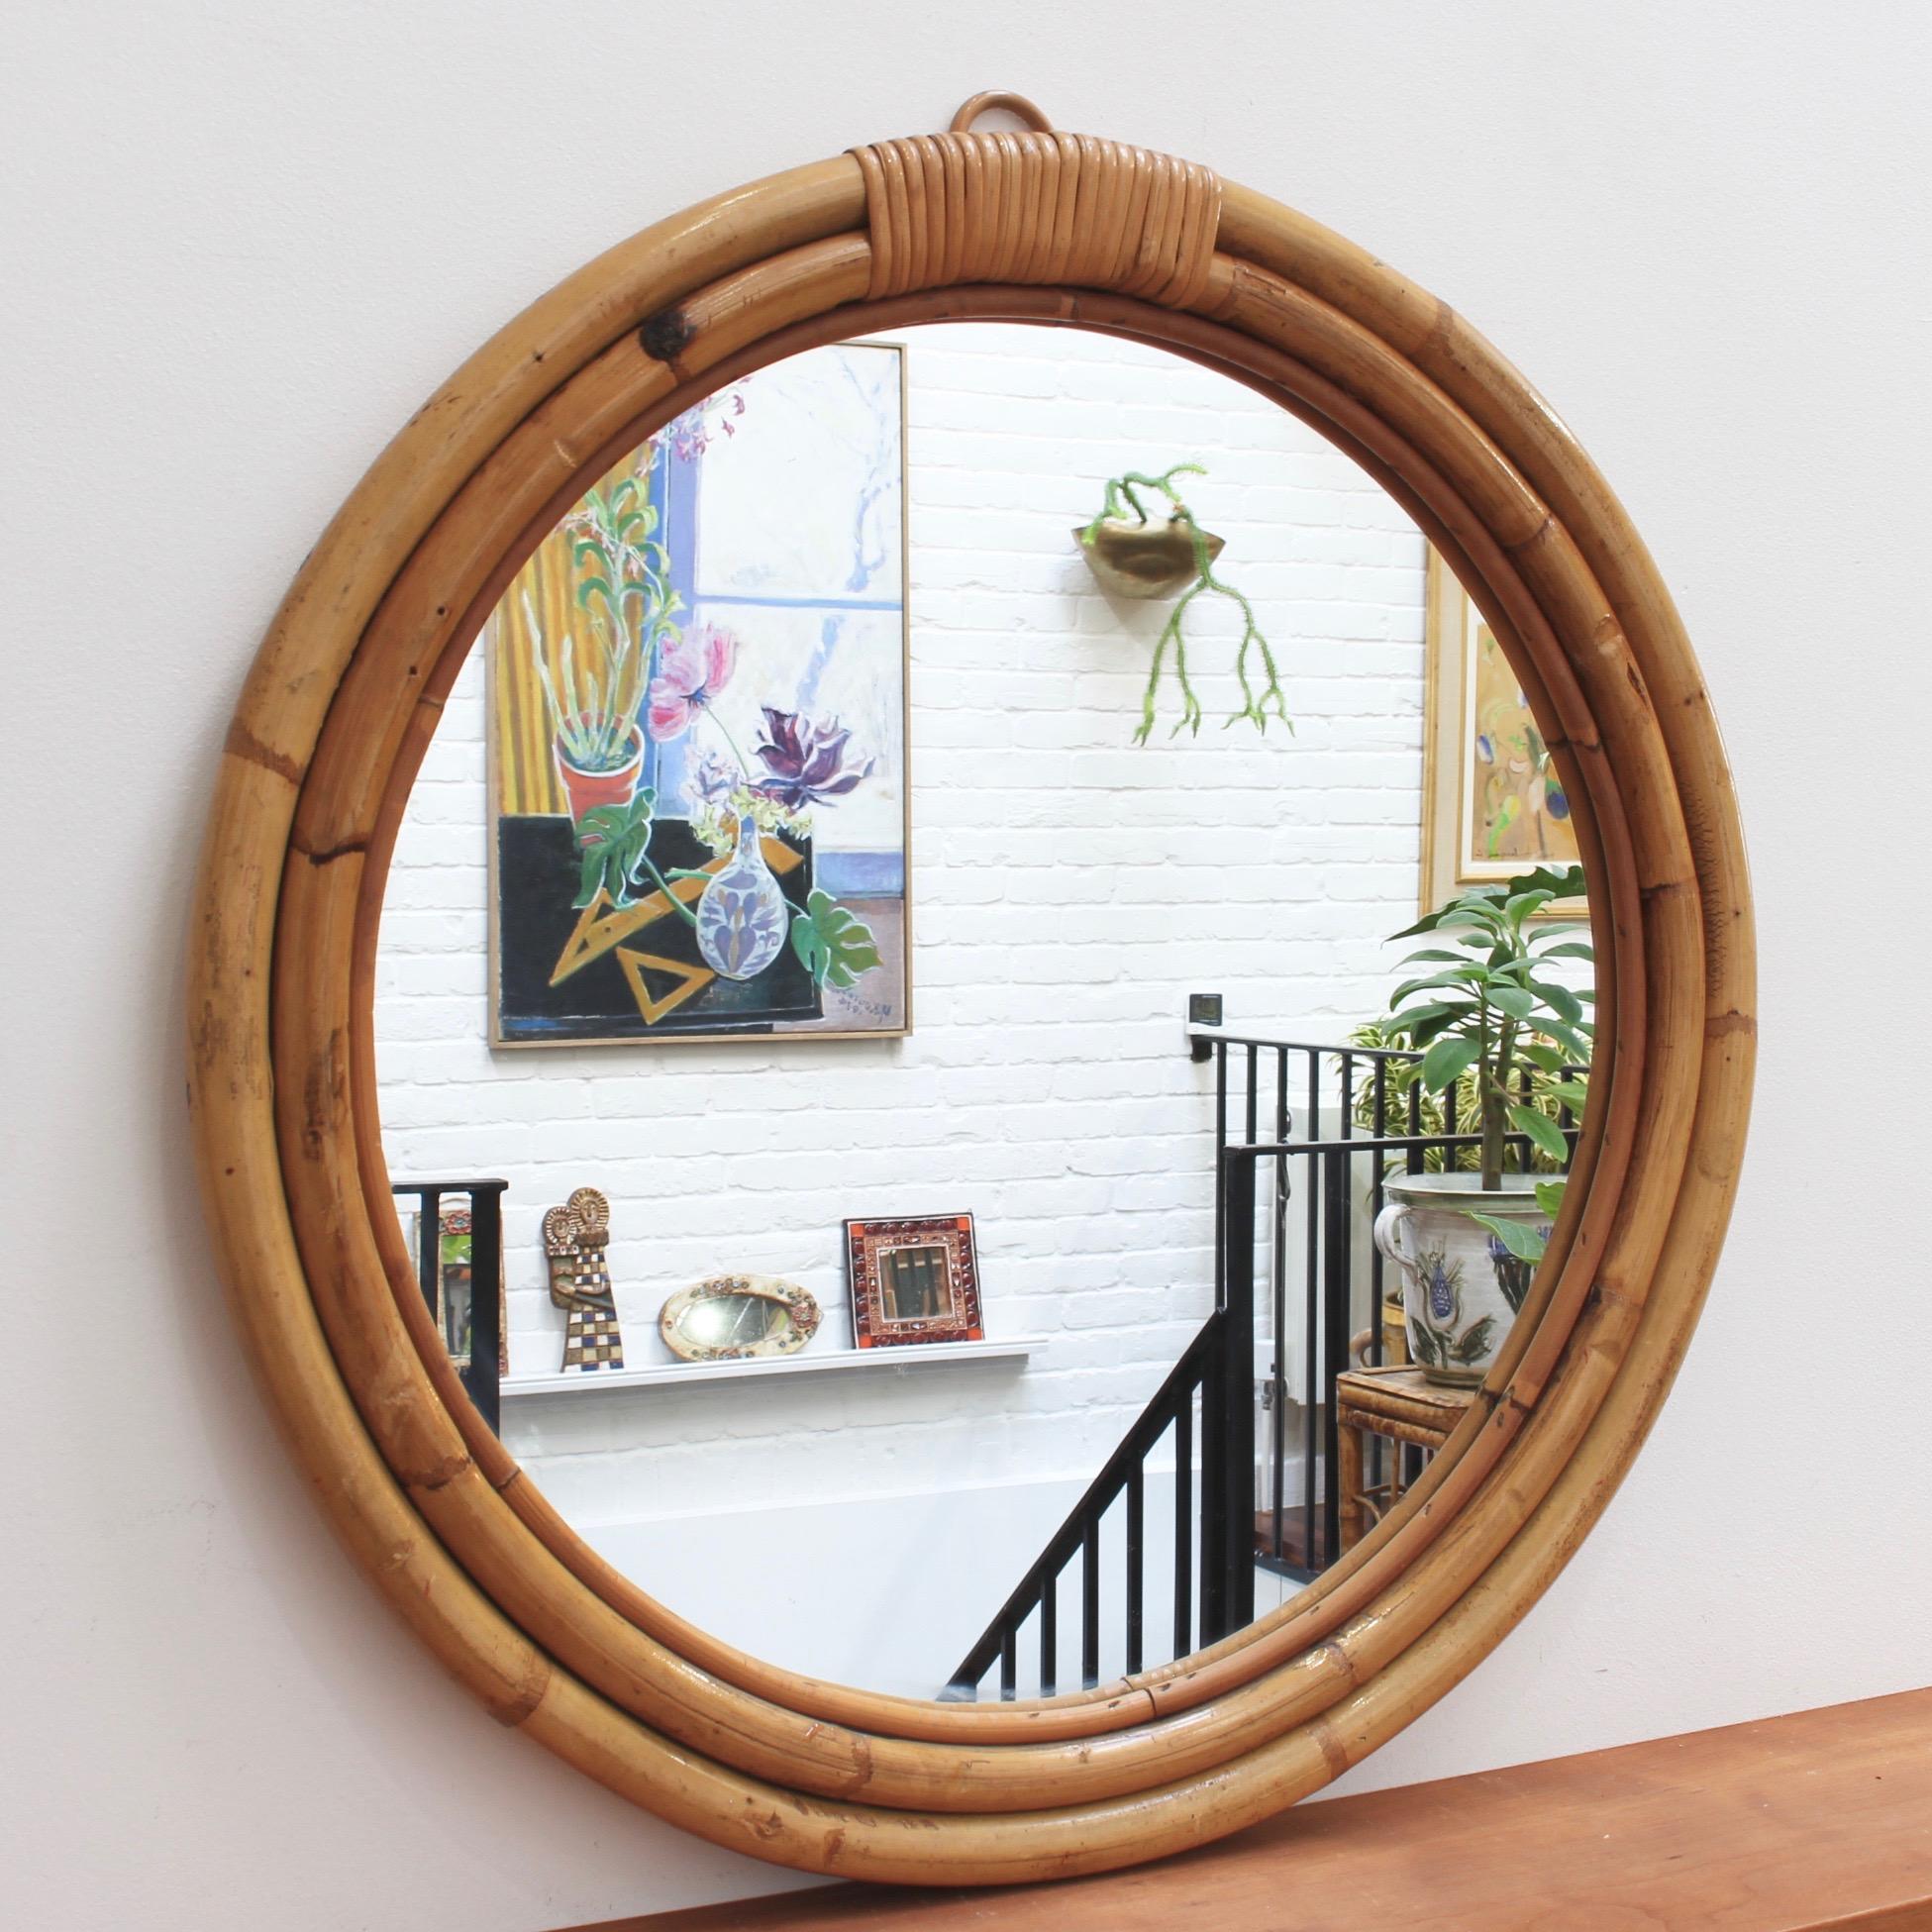 Italian 'porthole' style bamboo and rattan wall mirror circa 1960s. Three concentric tubular rounds of both bamboo and rattan form the structural frame for this porthole mirror with bands of binding rattan. There is a graceful, aged patina on the